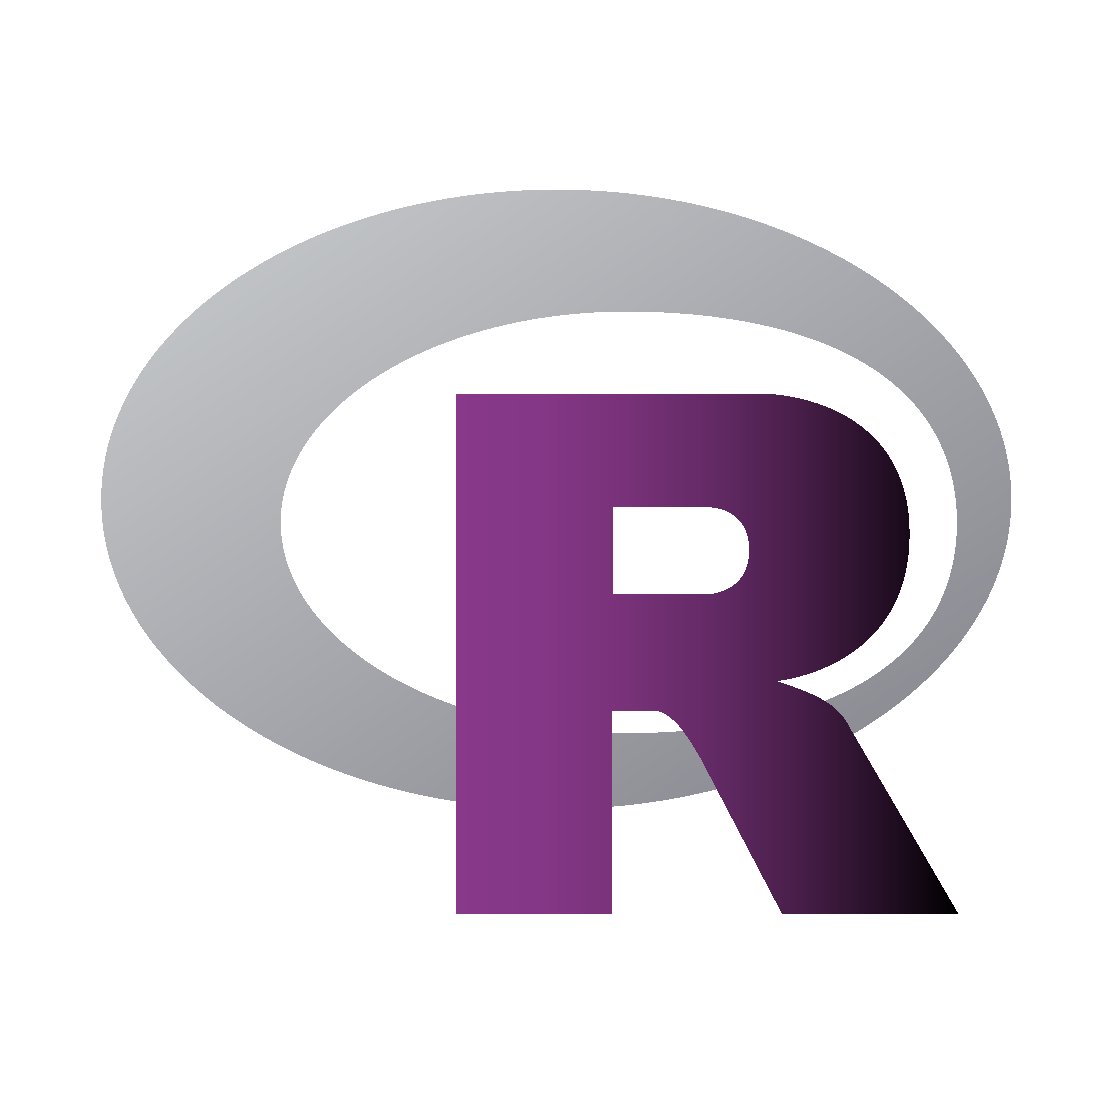 R-ladies Montpellier is a part of @RLadiesGlobal, promoting diversity in the #rstats community.
#RLadies